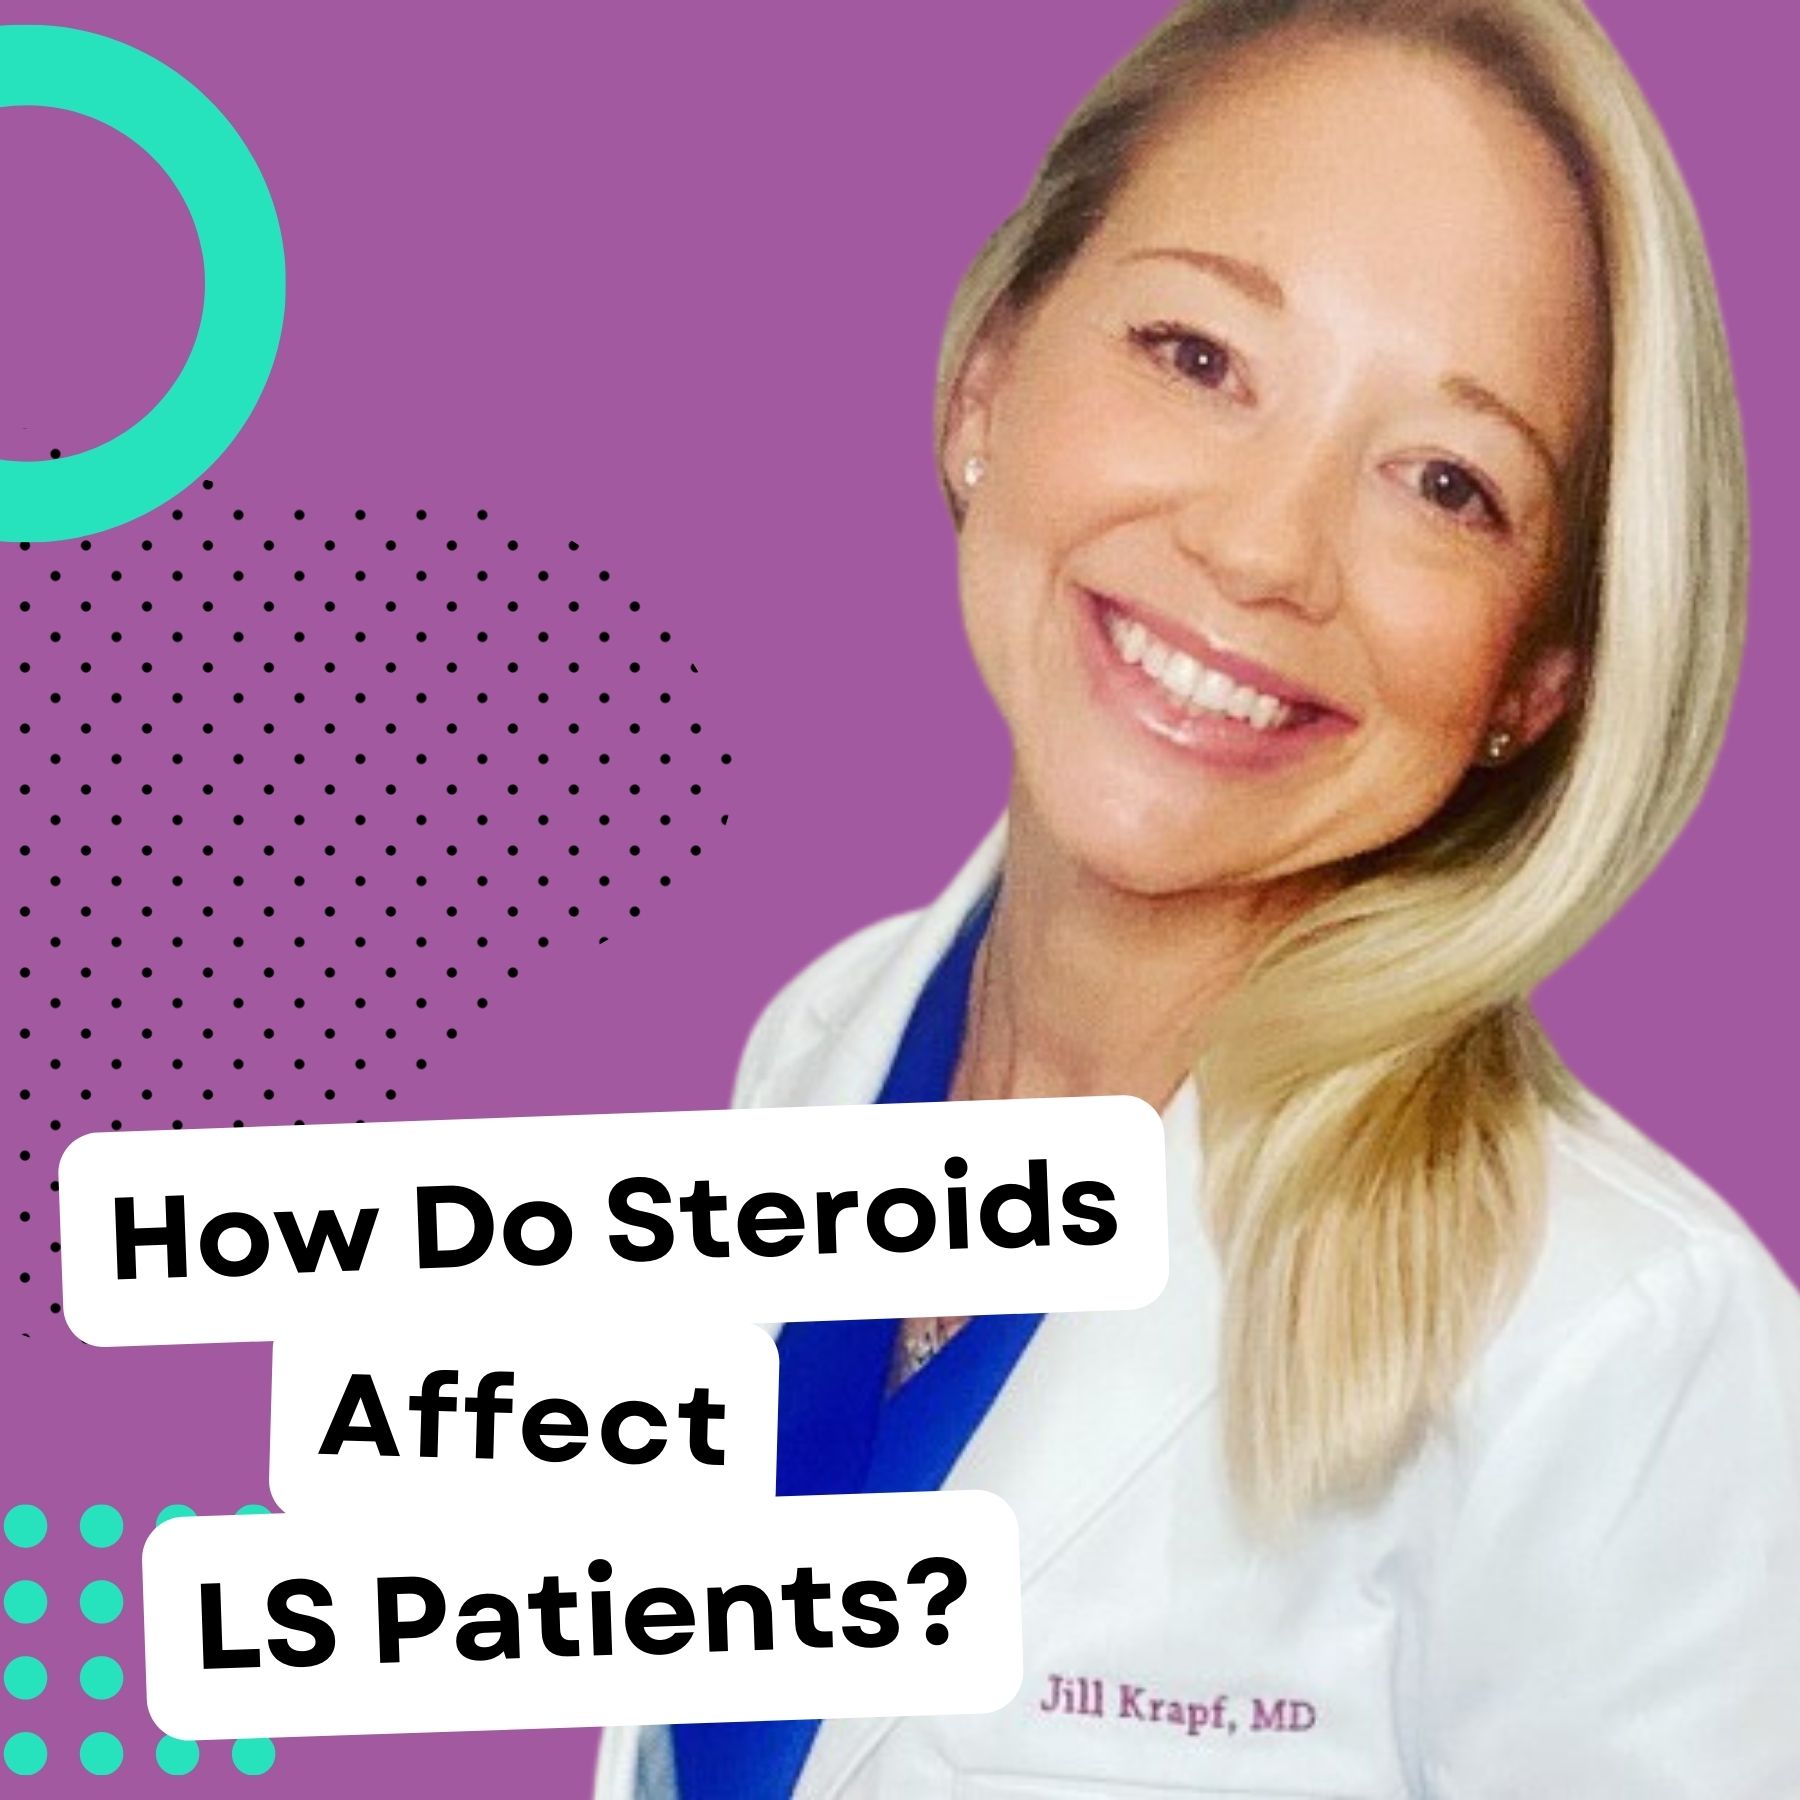 How steroids affect lichen sclerosus patients with Dr. Jill Krapf